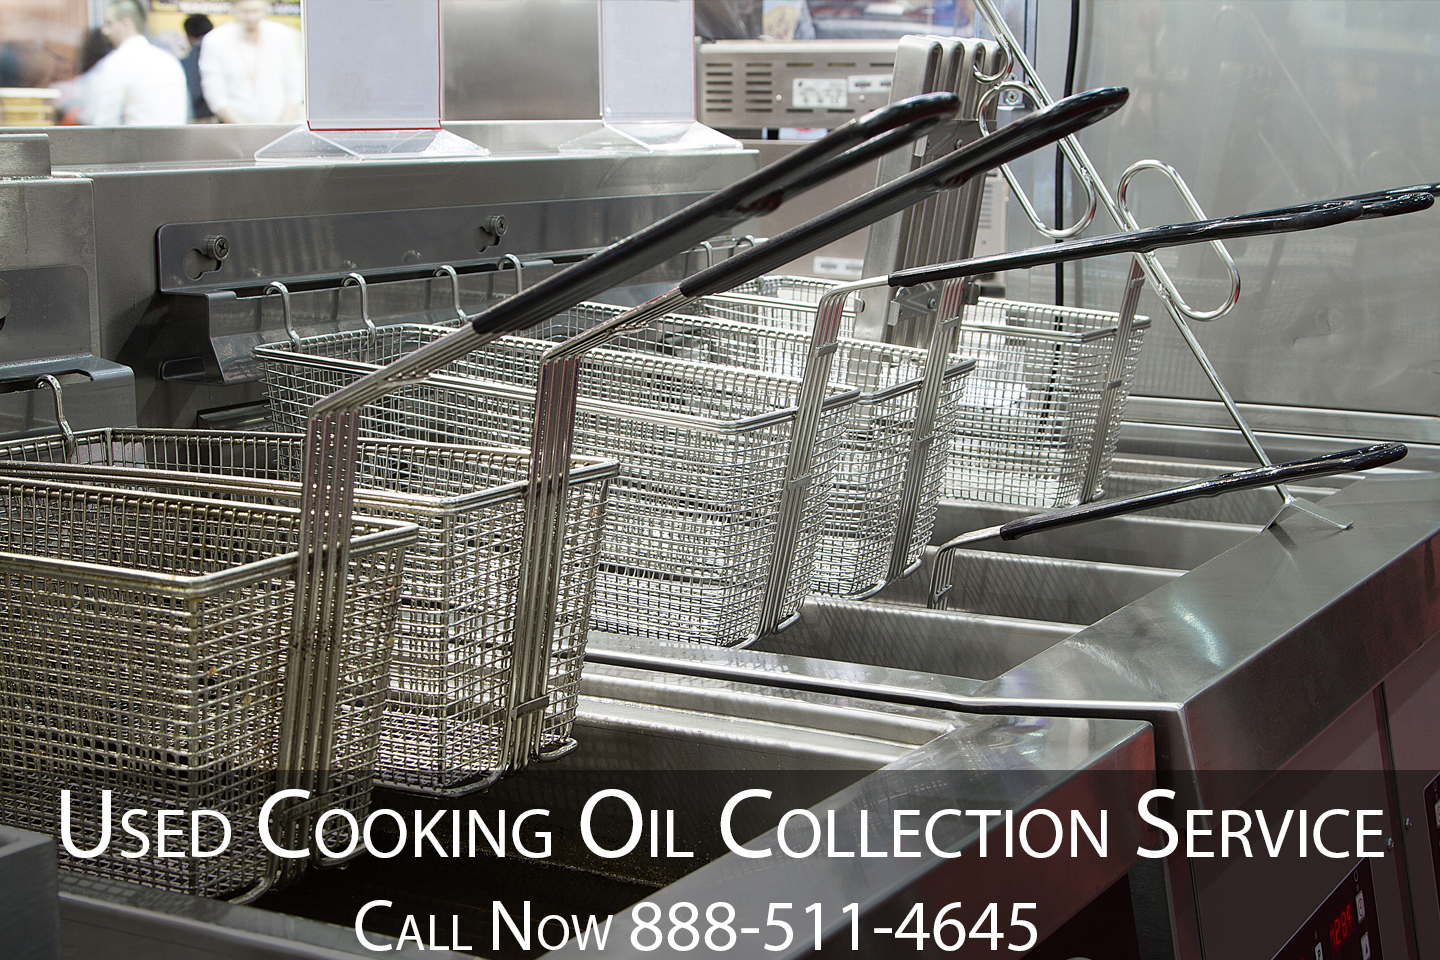 It is required by the city Tustin, for all food servicing establishments to hire a licensed used cooking oil collection company to pick up and properly remove their waste cooking oil. As grease collection recycling companies, we must ensure that all waste is transported safely and disposed properly.  The majority of used cooking oil collected from commercial kitchens are filtered and processed turning it into renewable fuel called biodiesel. With a large increase in food servicing estabishments, a substantial amount of coming from restaurants are responsible for a major percentage of fueling transportation vehicles.